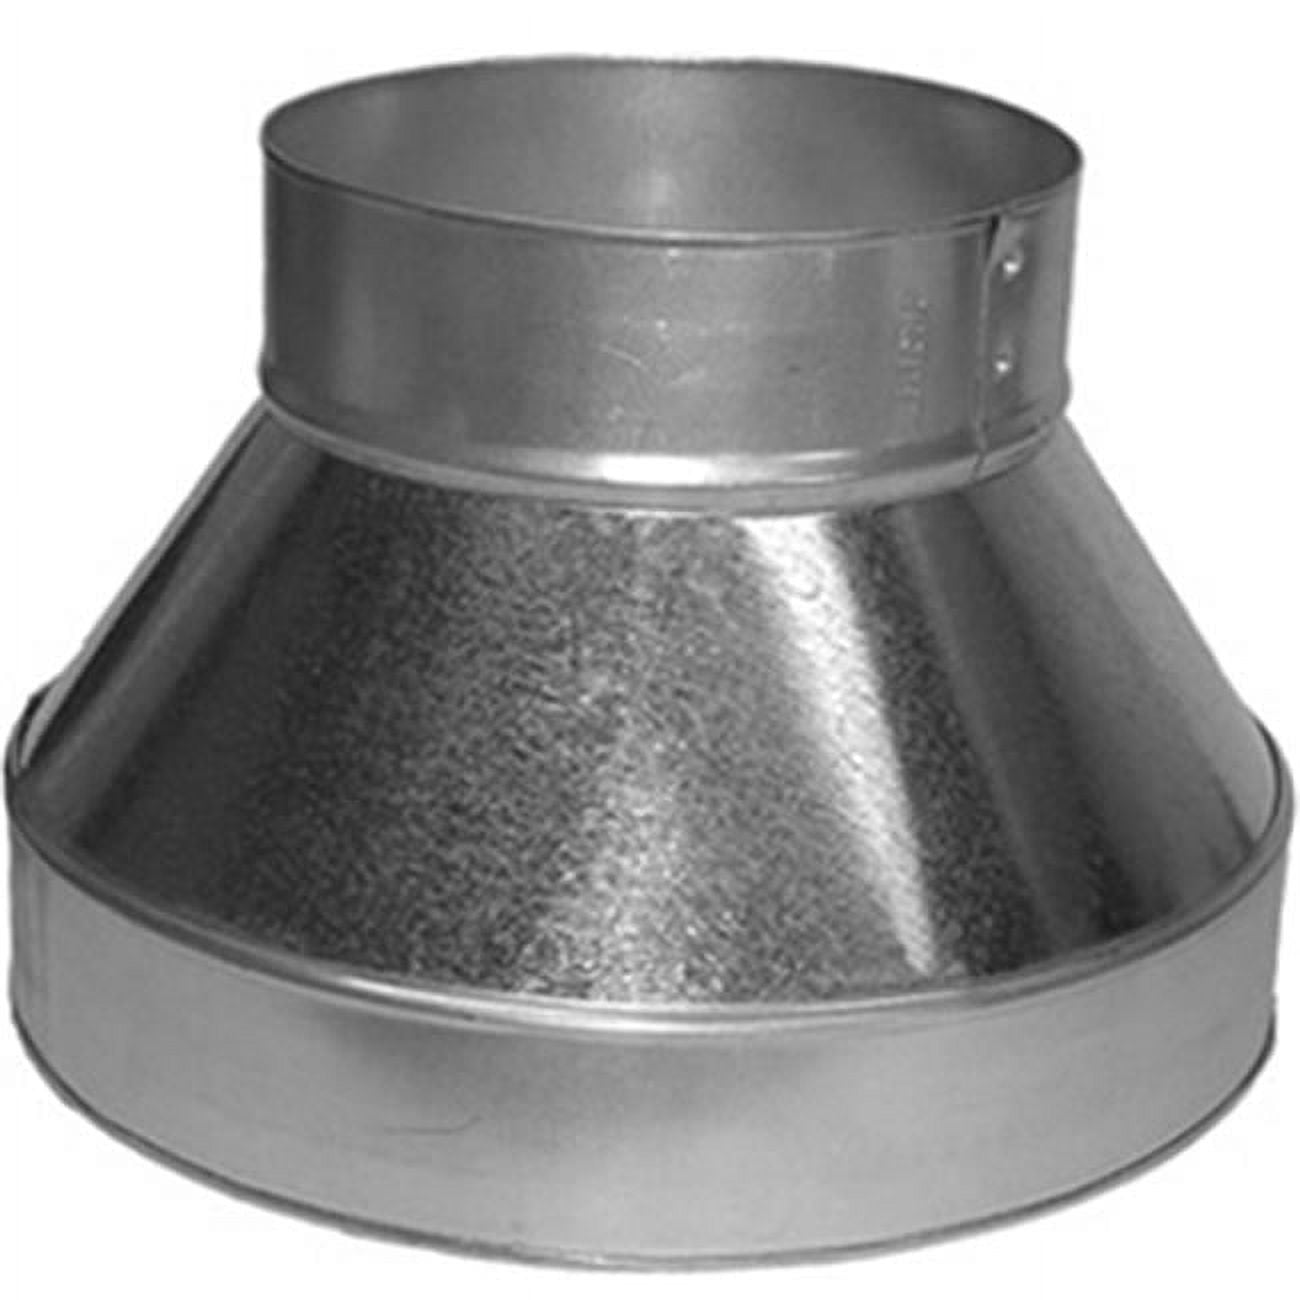 8x6-311p 8 X 6 In. Galvanized Increaser & Reducer No End Crimped